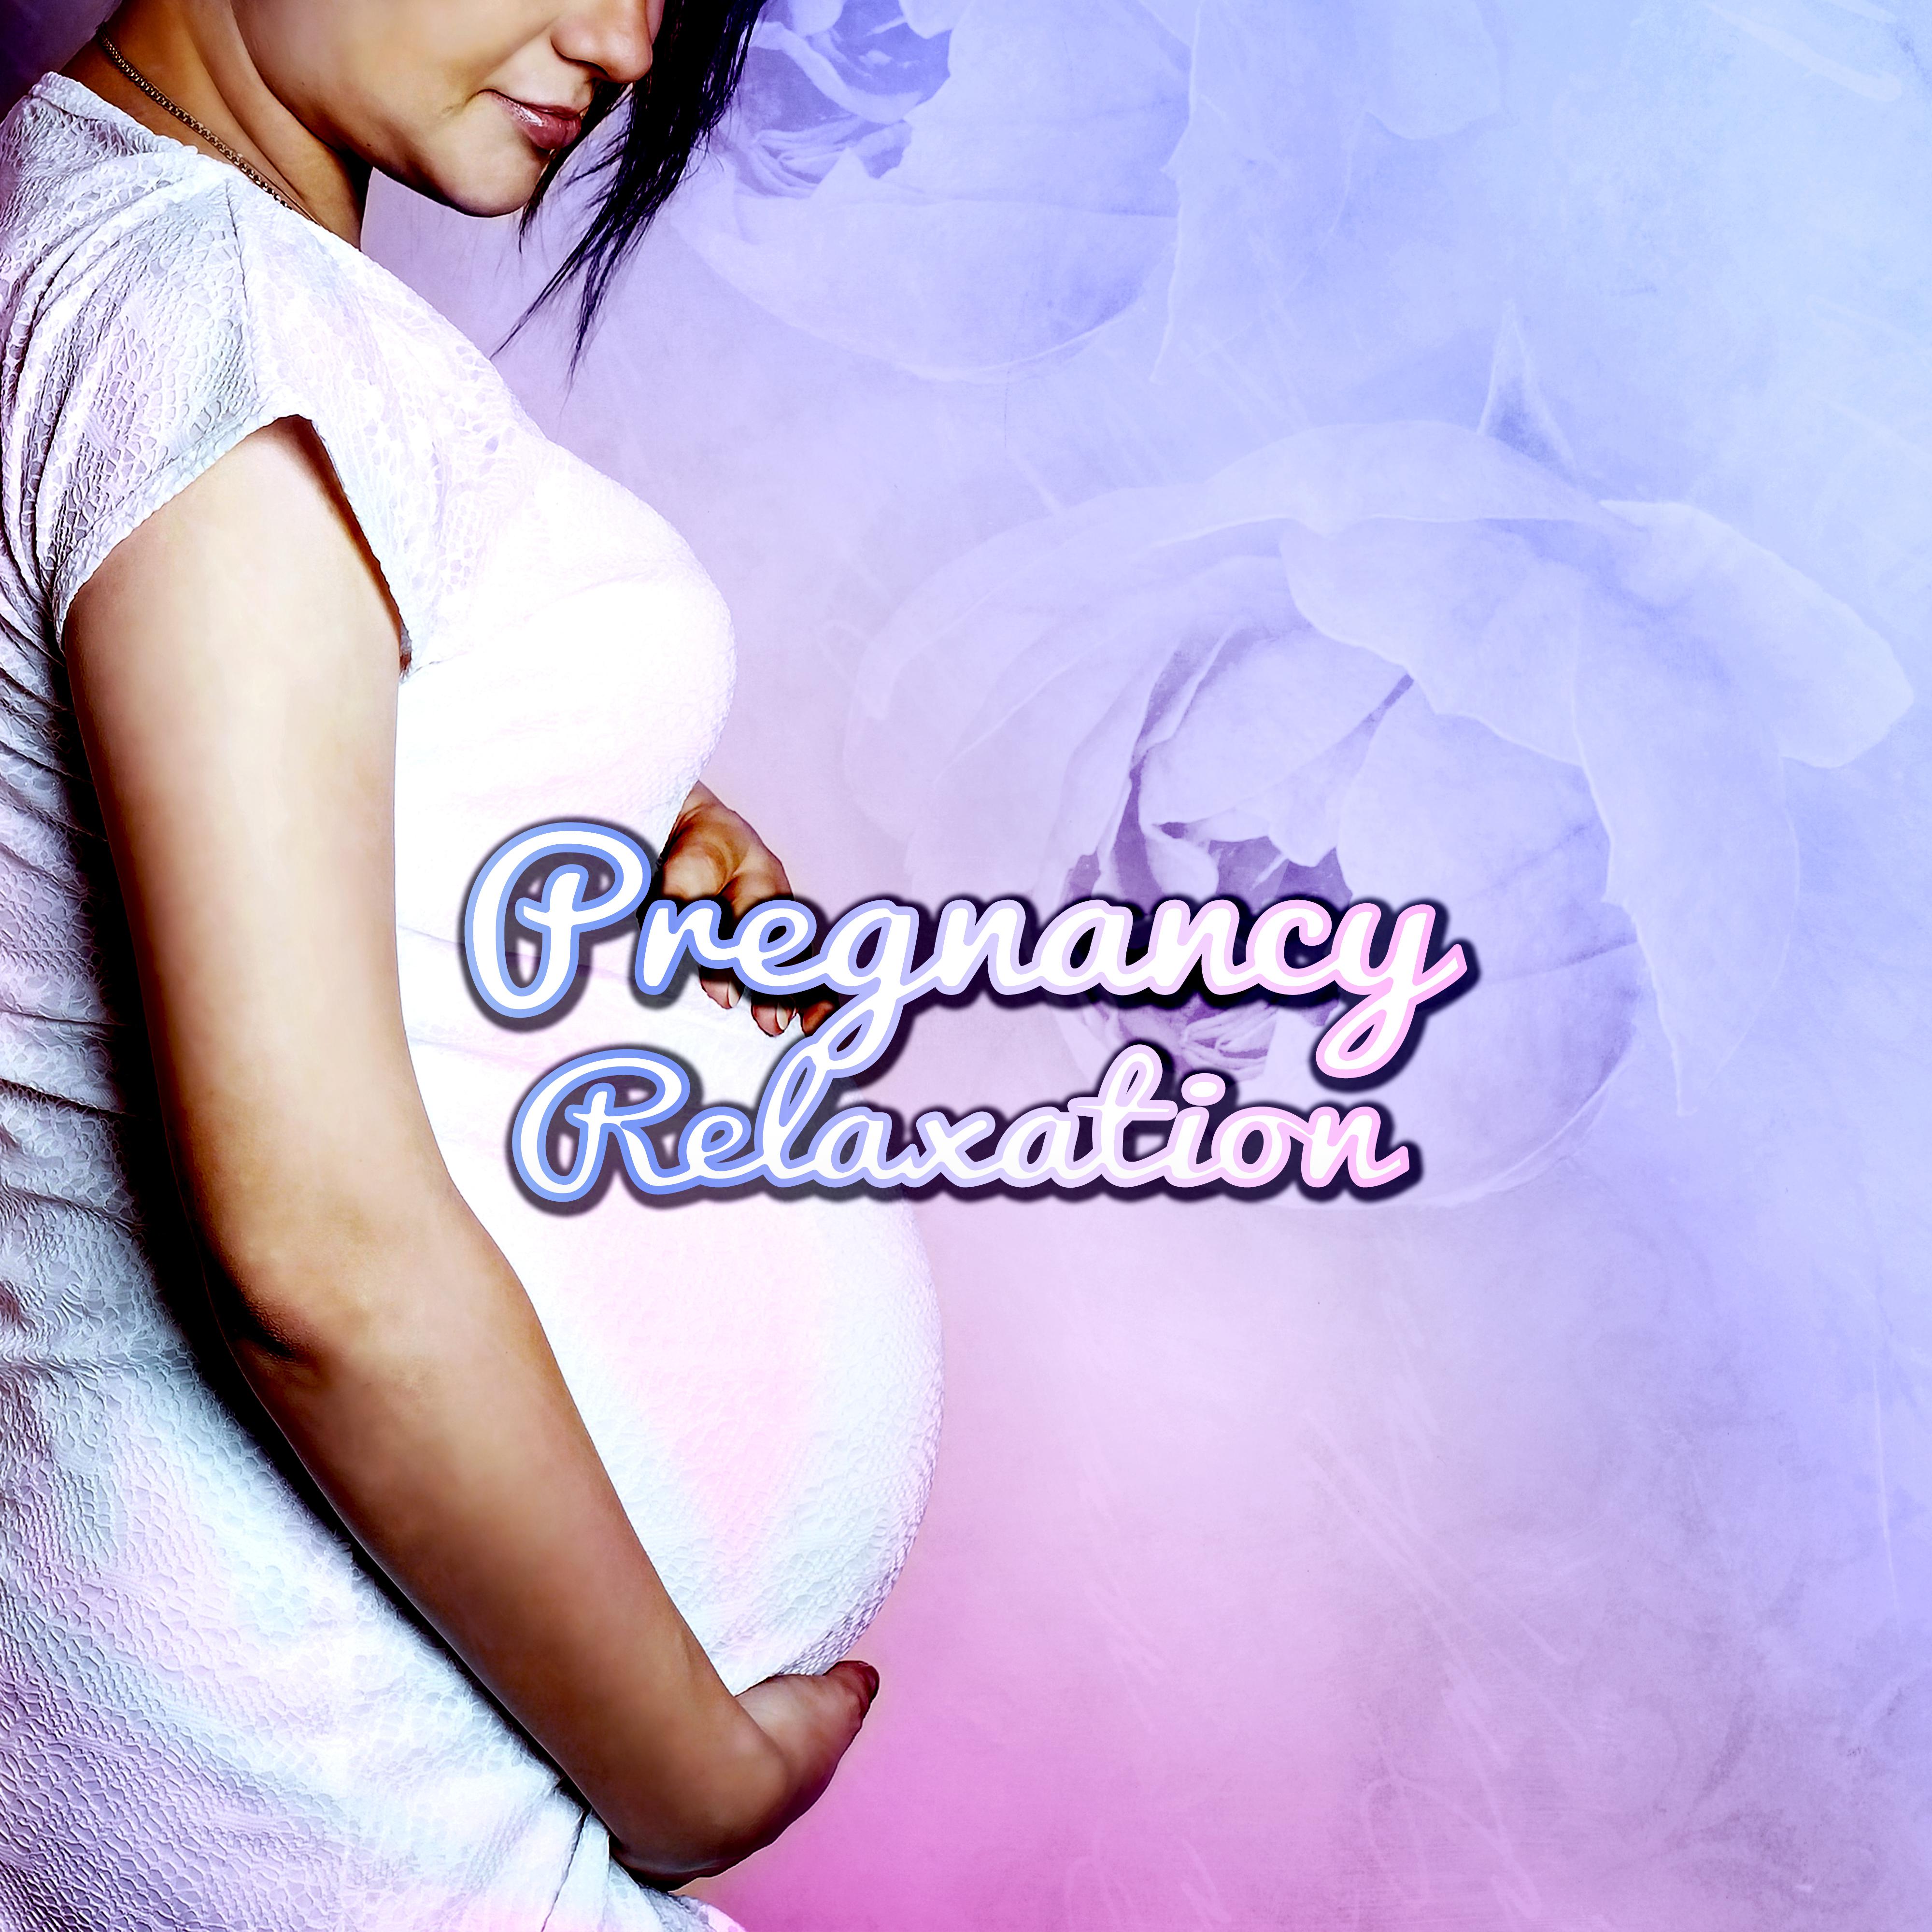 Pregnancy Relaxation – Nature Sounds for Pregnant to Relax, Prenatal Yoga, Asian Zen Spa, Music for Massage, Calm Your Baby